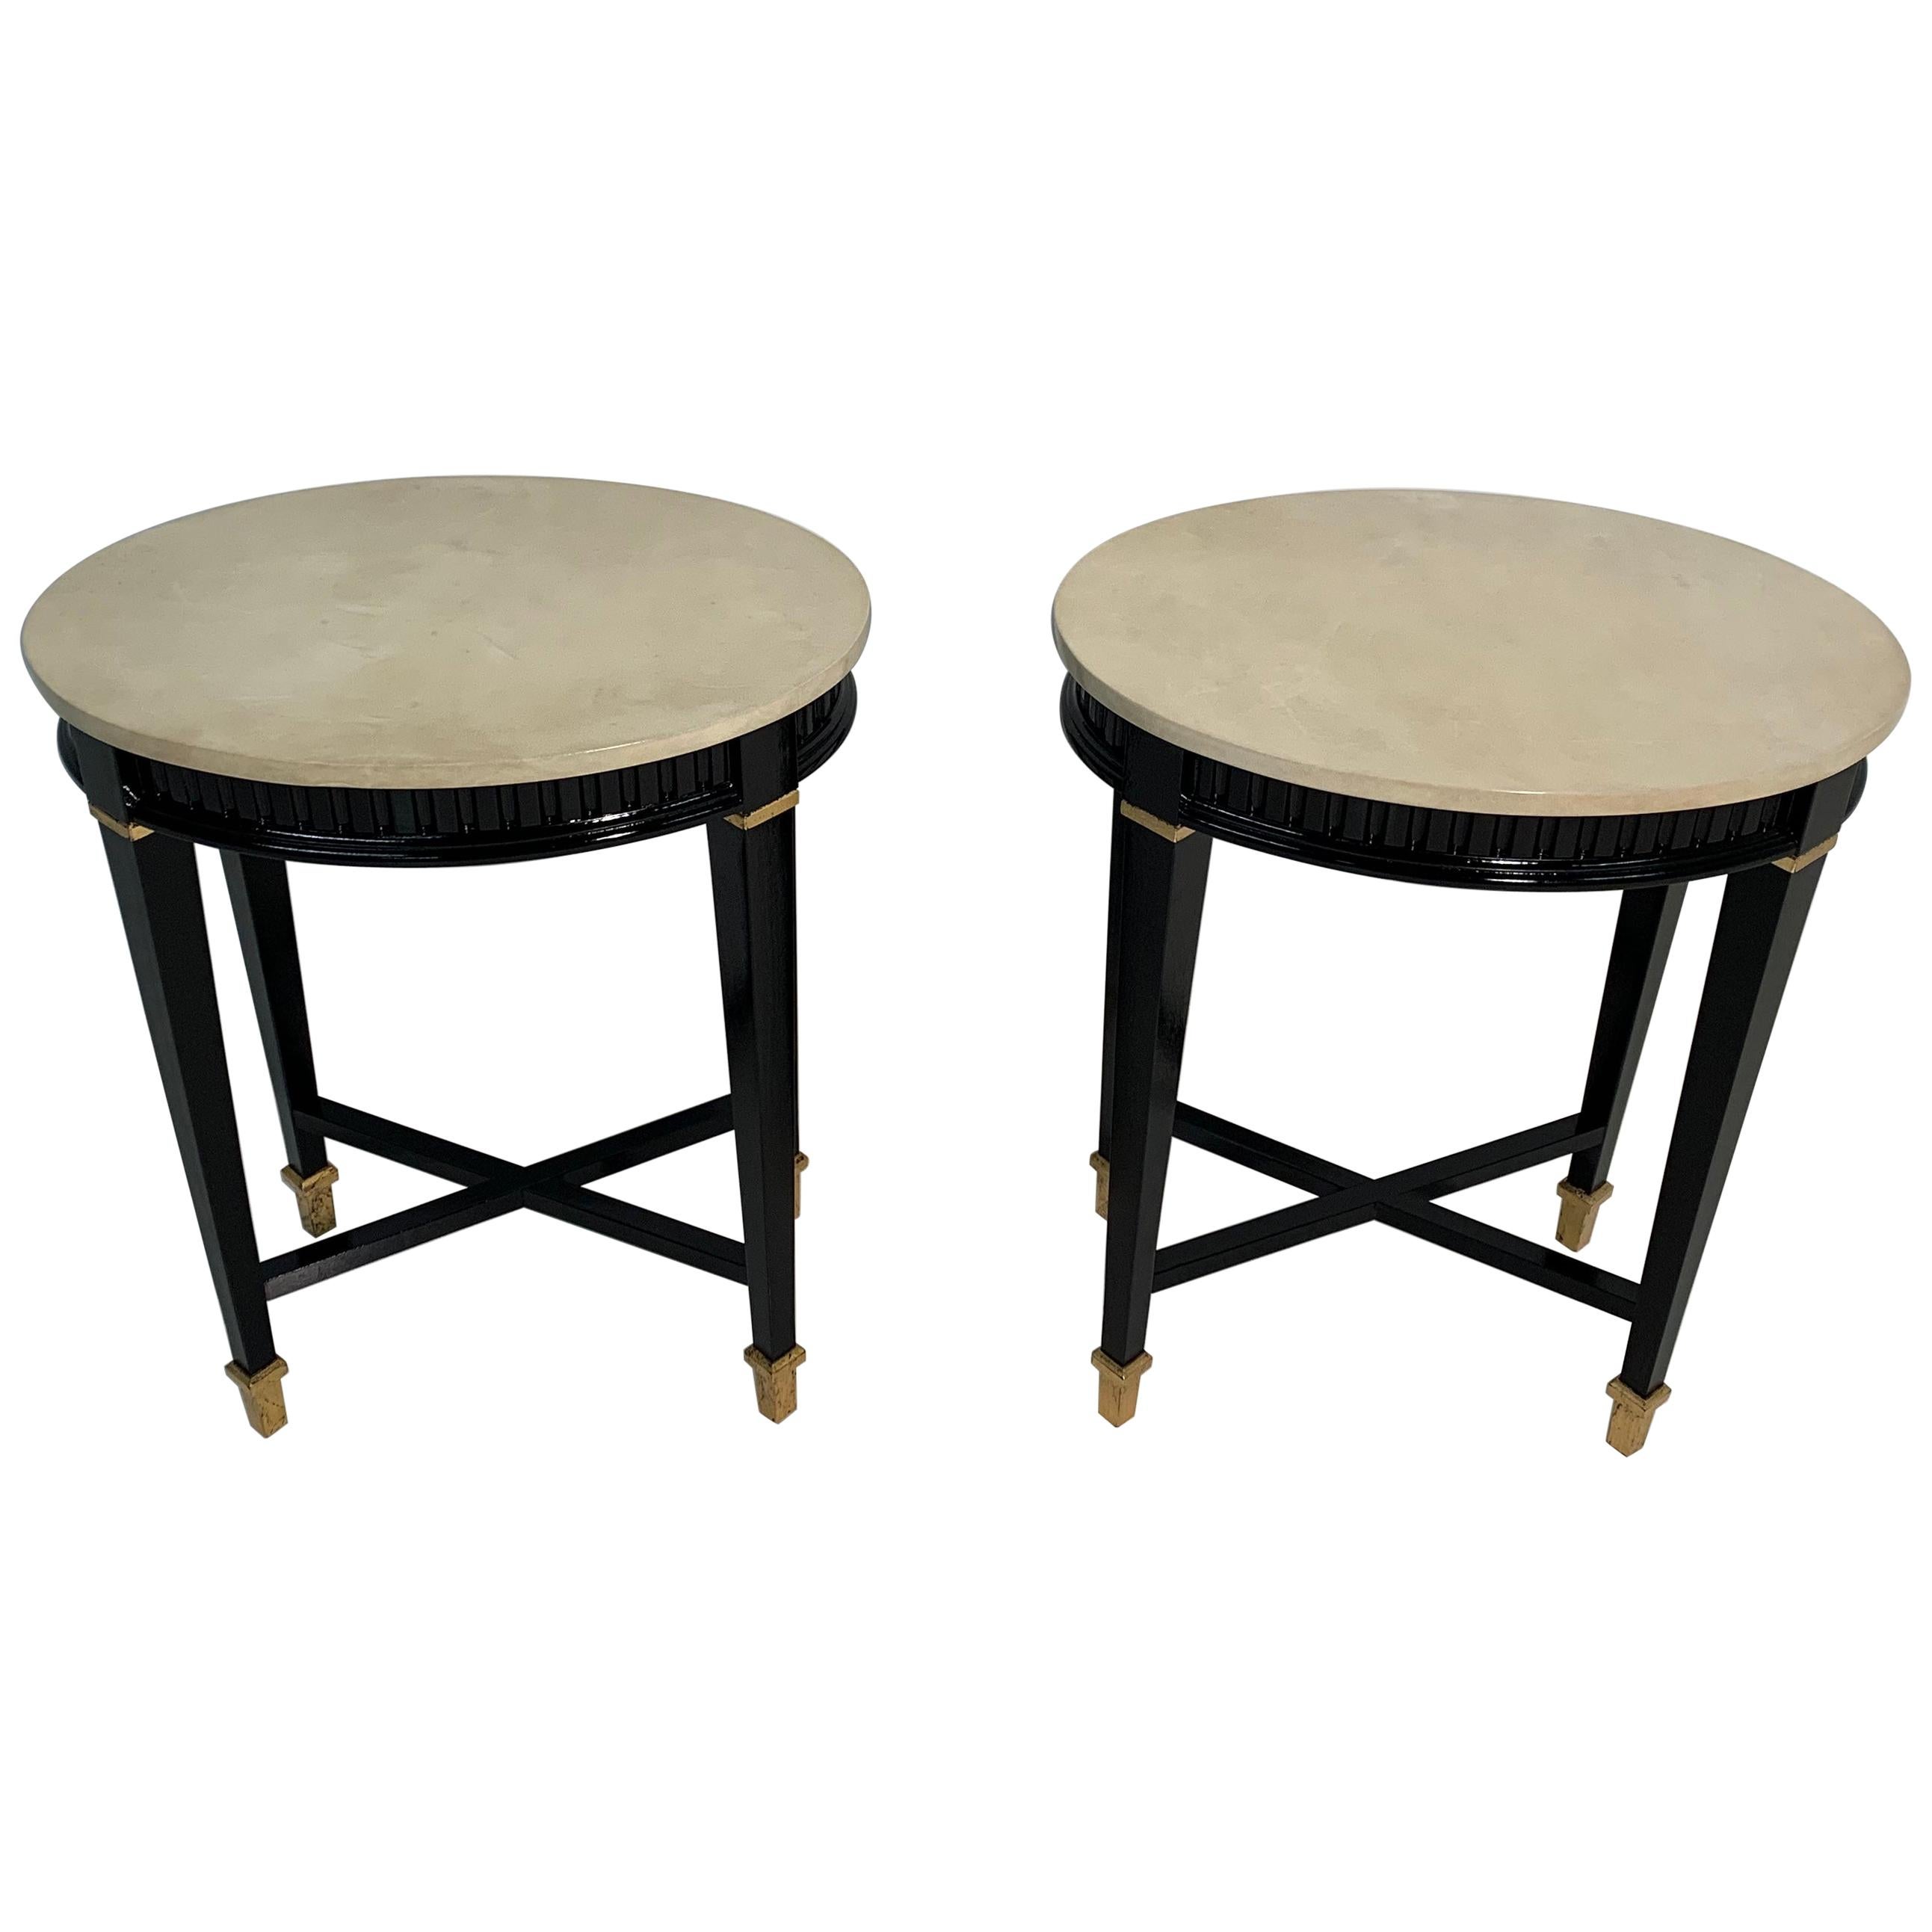 Pair of Italian Art Deco Parchment Side Table